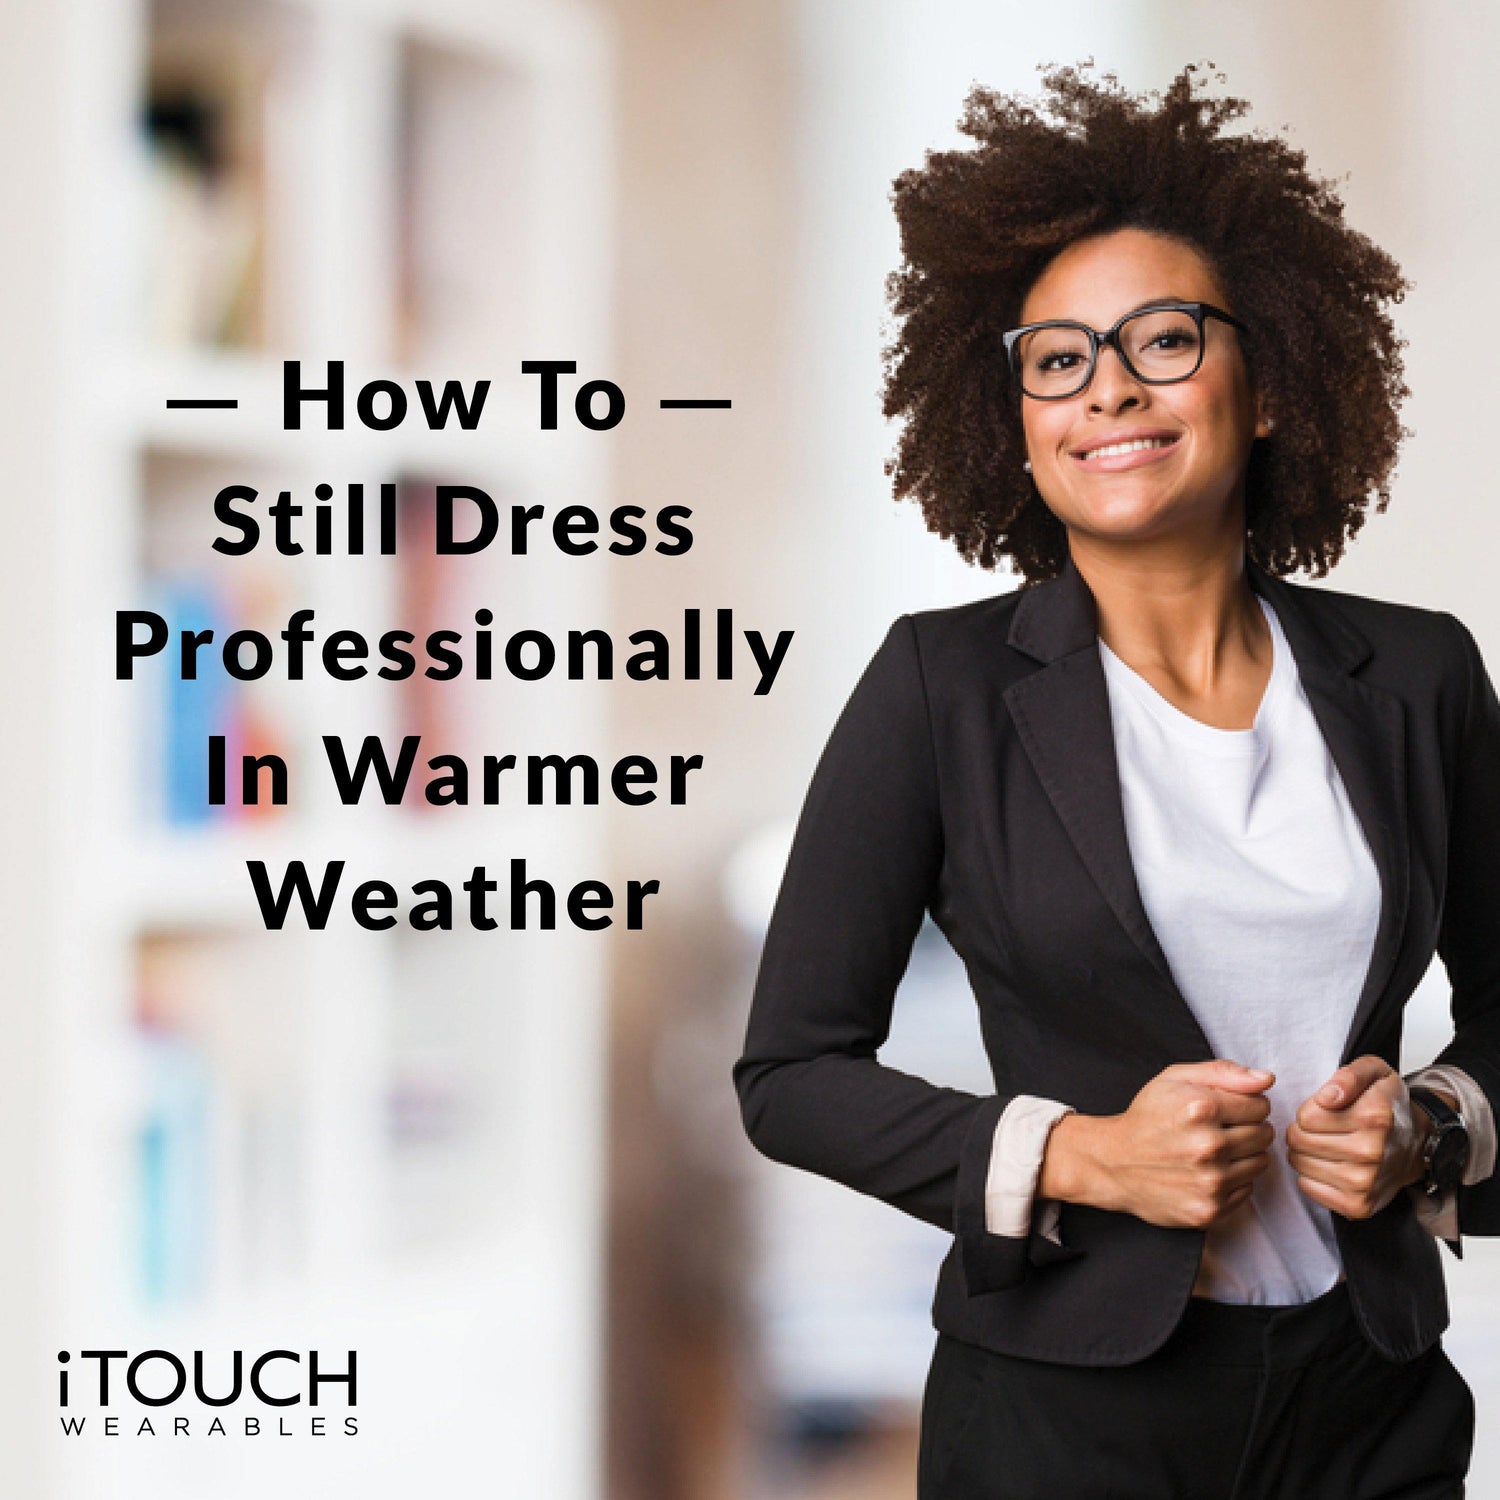 How To Still Dress Professionally In Warmer Weather - iTOUCH Wearables